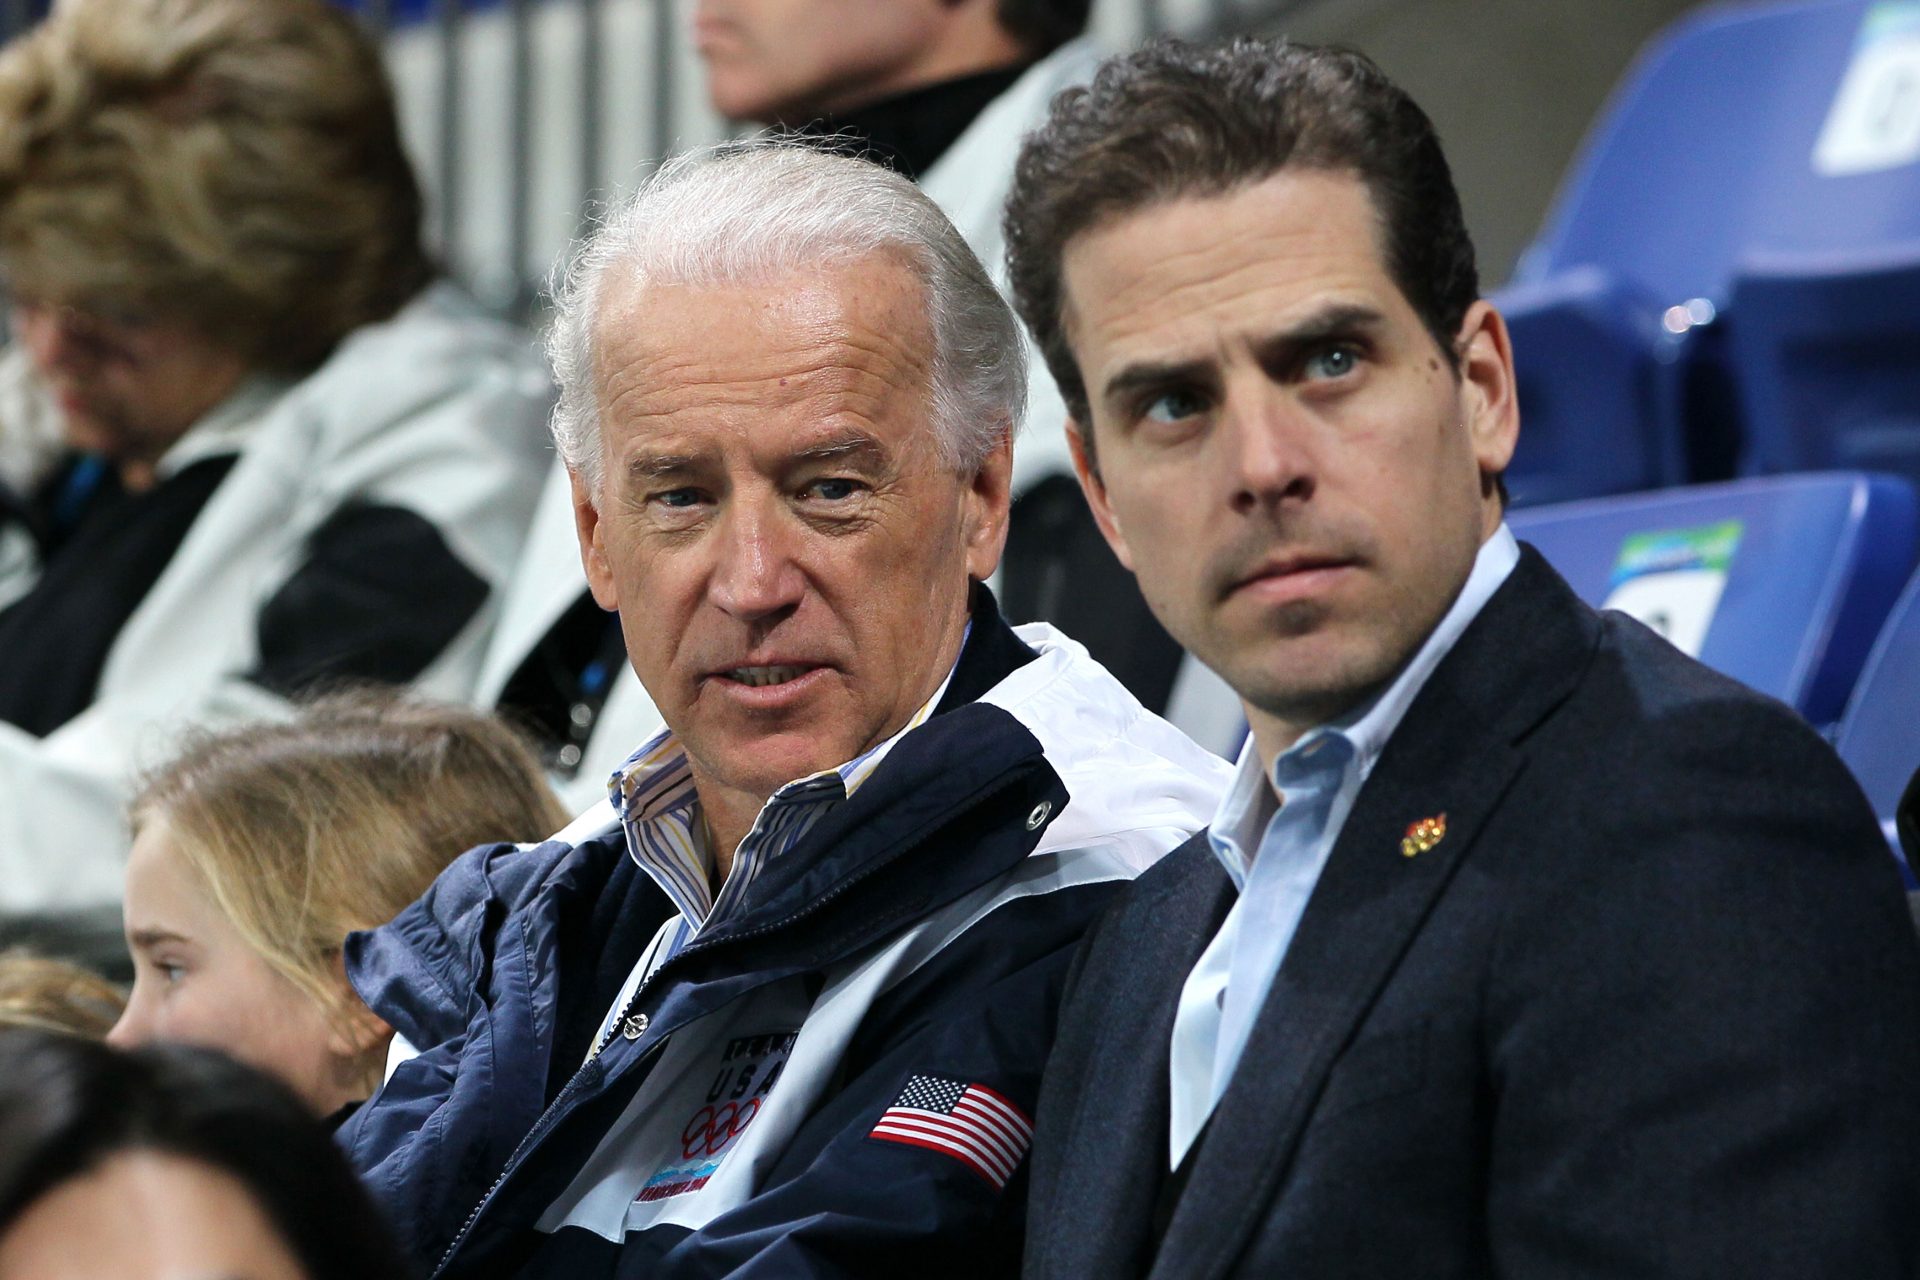 Hunter Biden found guilty and faces up to 25 years in prison